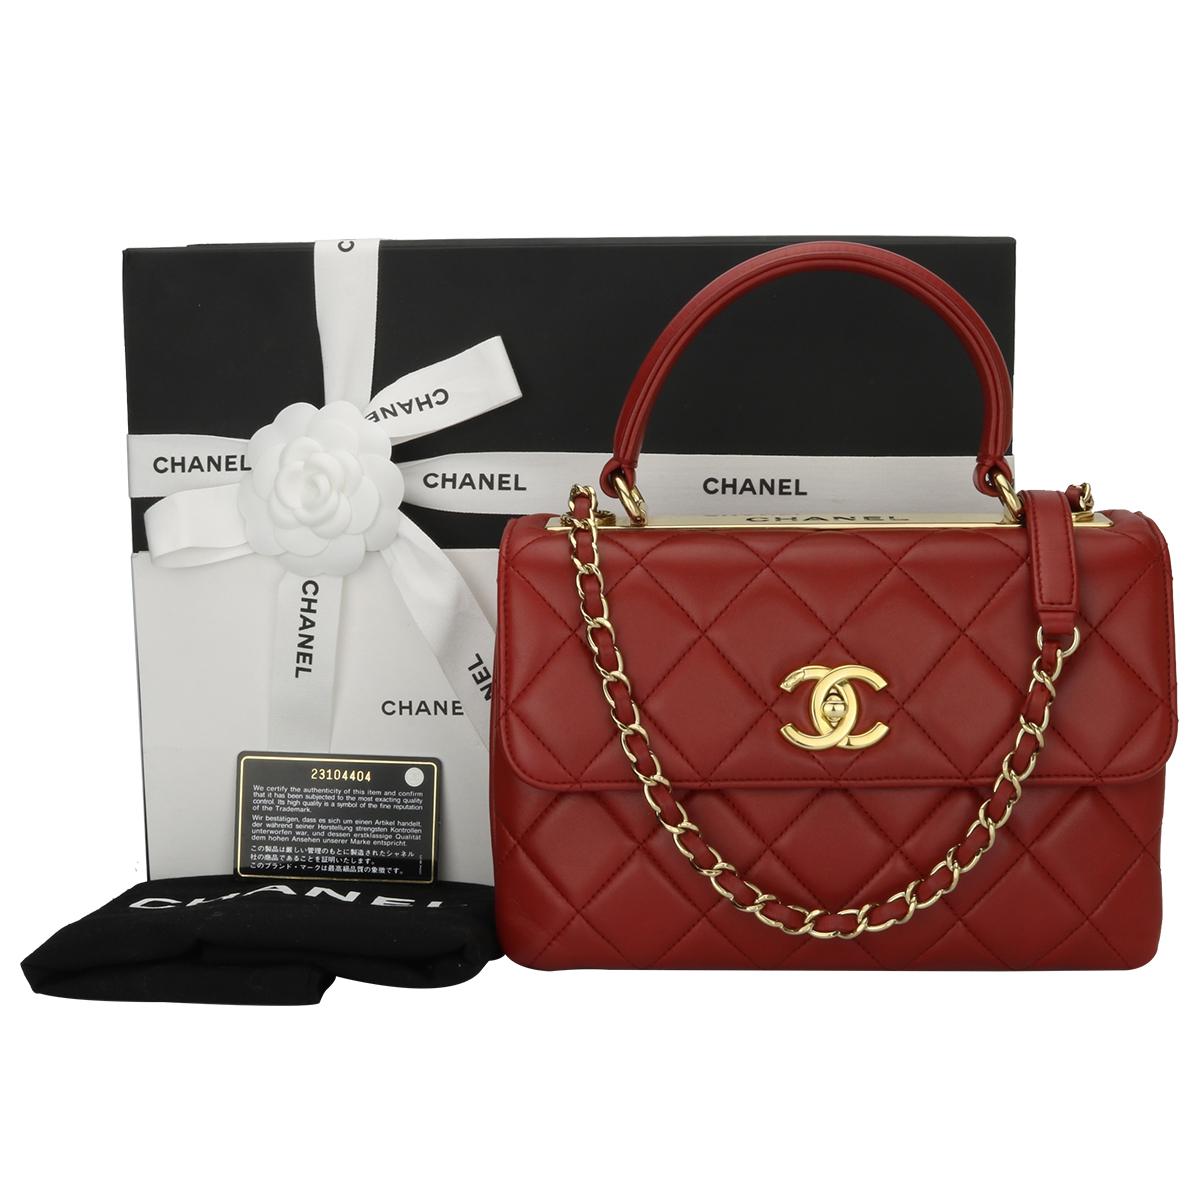 Authentic CHANEL Trendy CC Small Red Lambskin with Gold Hardware 2017.

This stunning bag is in a mint condition, the bag still holds its original shape, and the hardware is still very shiny.

Exterior Condition: Mint condition, corners show no